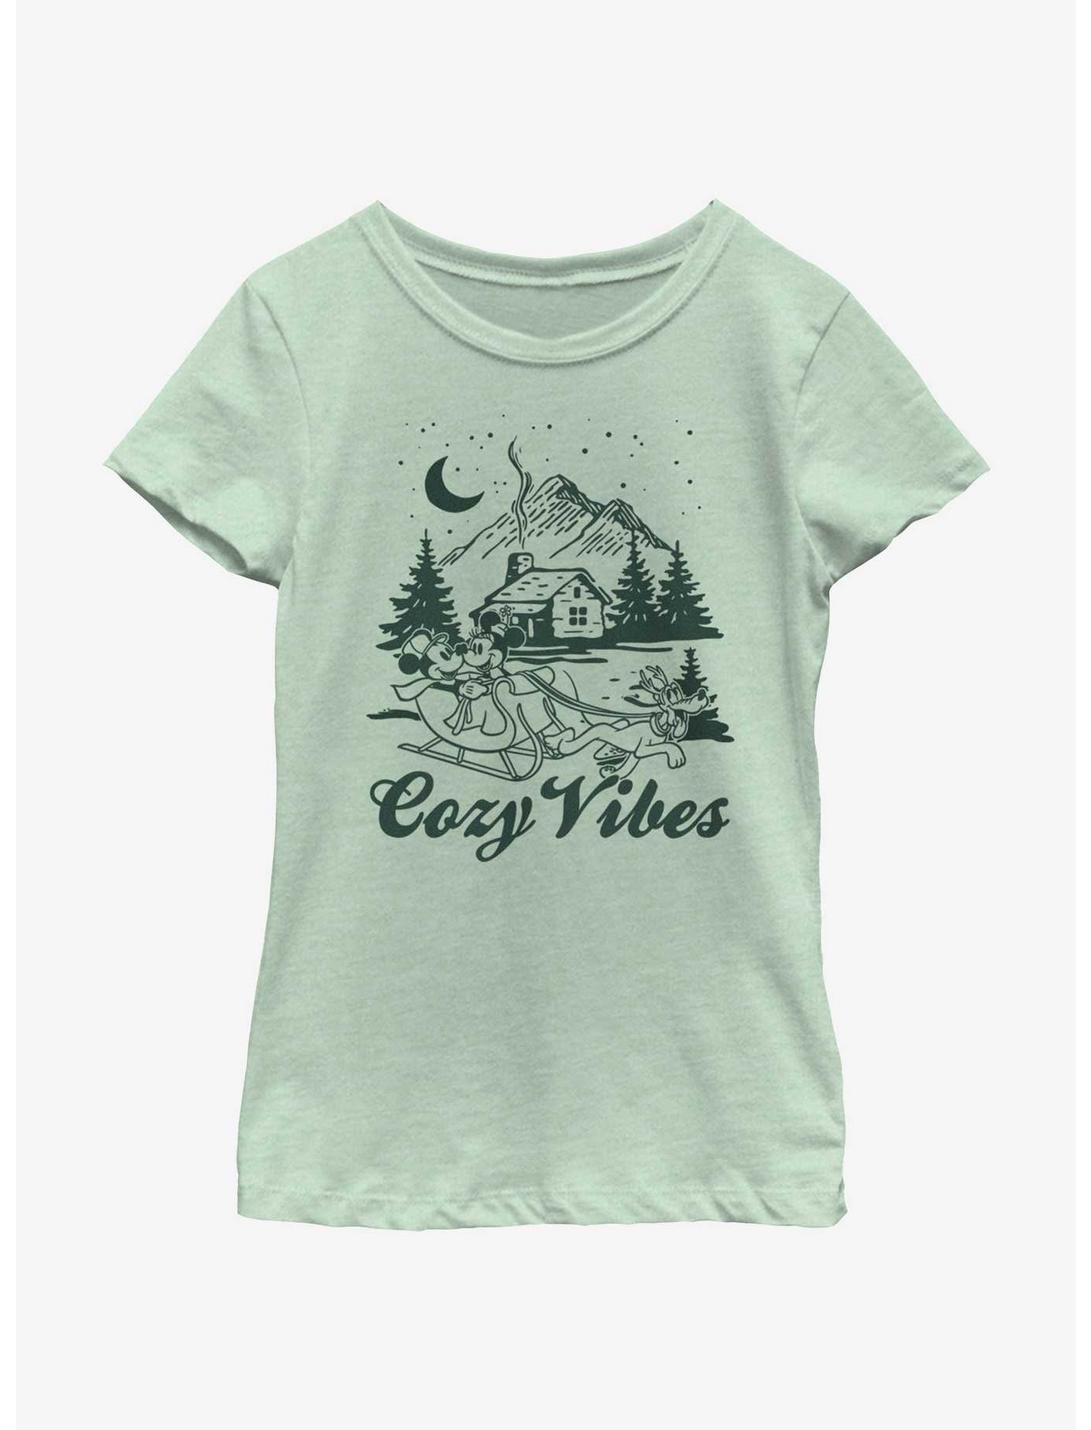 Disney Mickey Mouse Cozy Cabin Youth Girls T-Shirt, MINT, hi-res